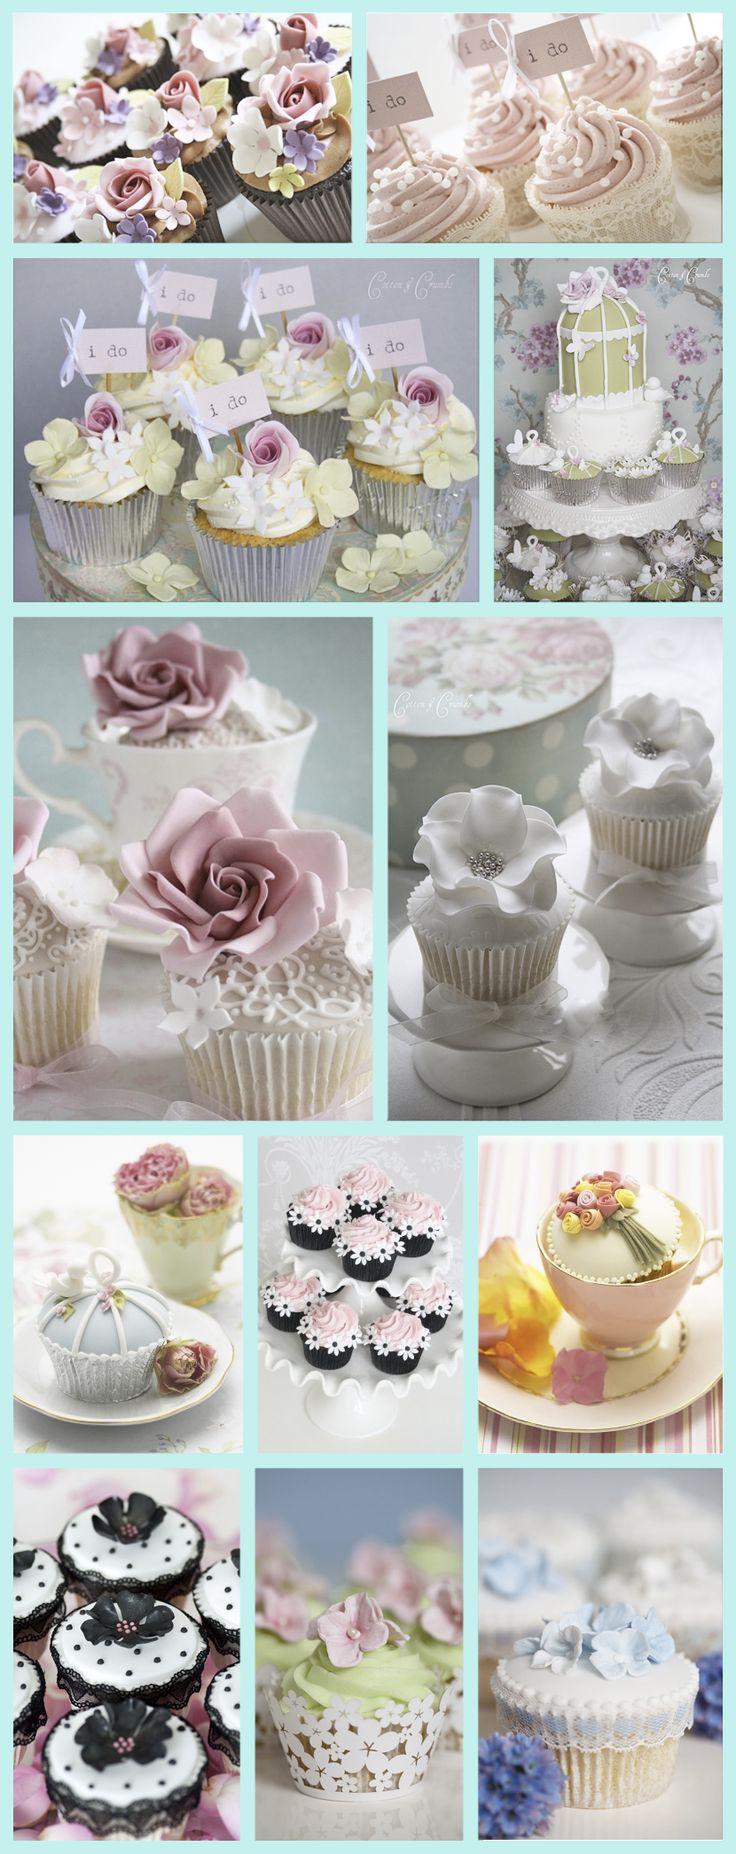 Wedding - wedding cupcakes along with cute messages